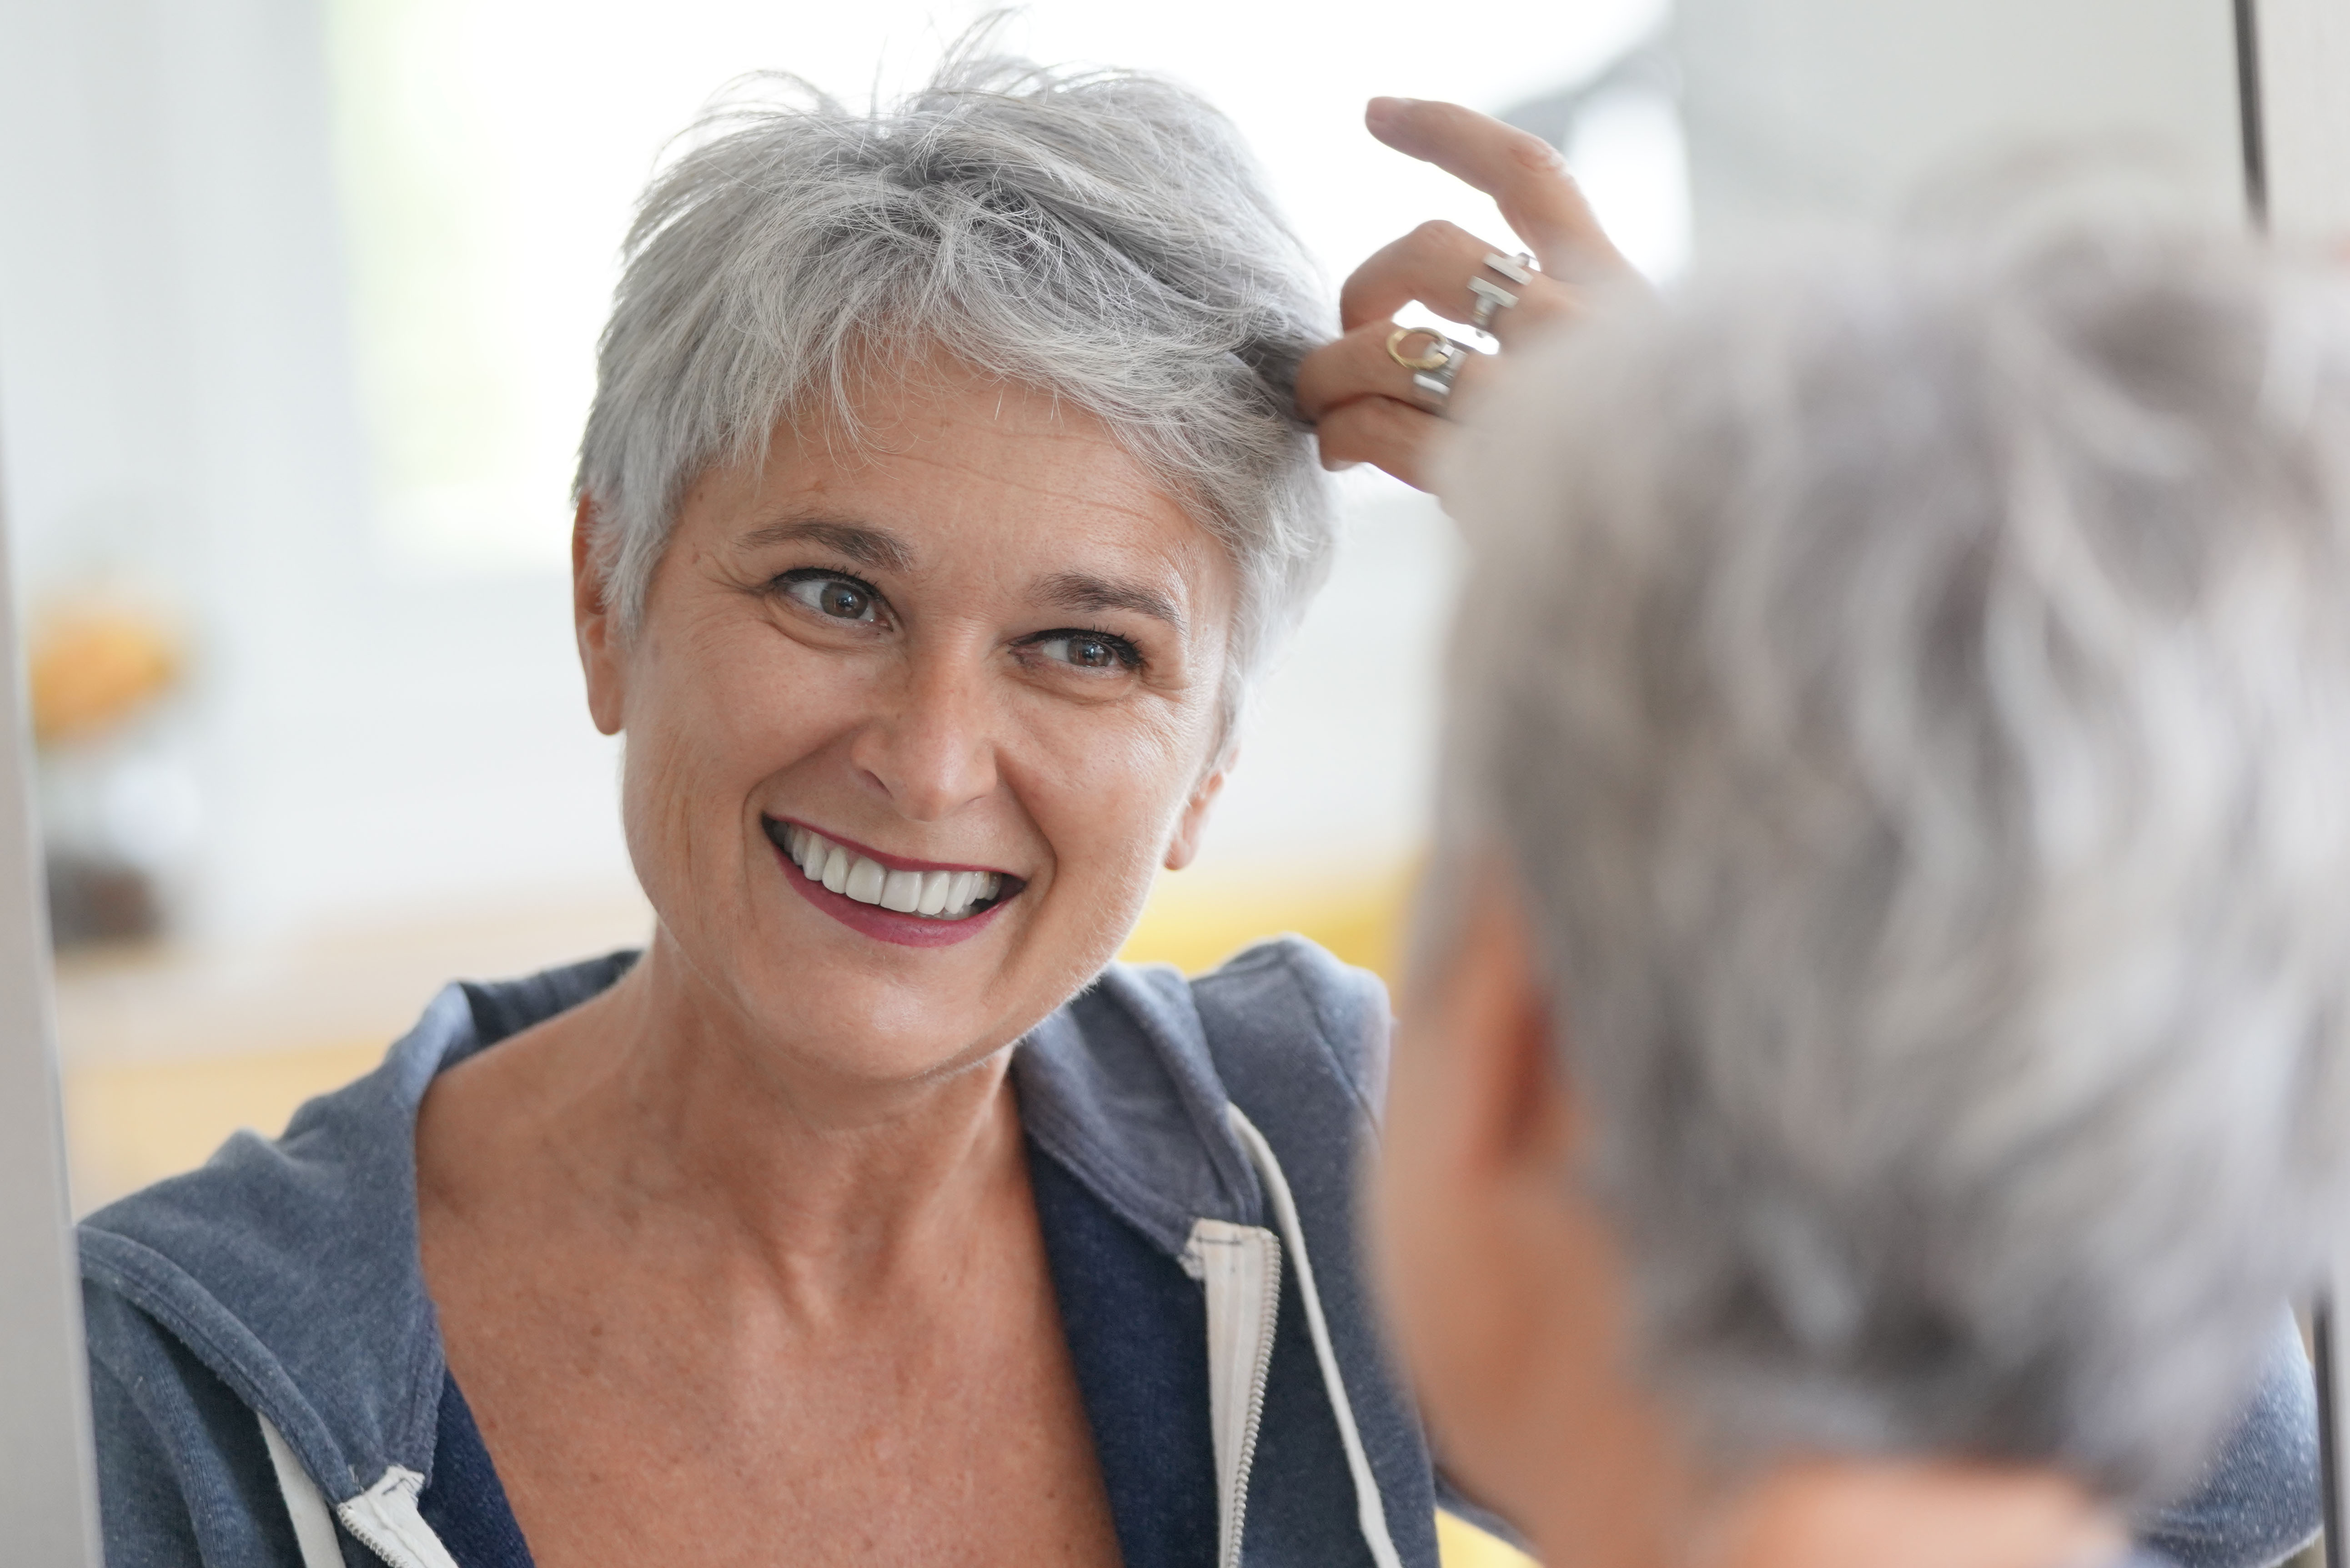 A gray-haired woman wearing a blue jacket | Source: Shutterstock